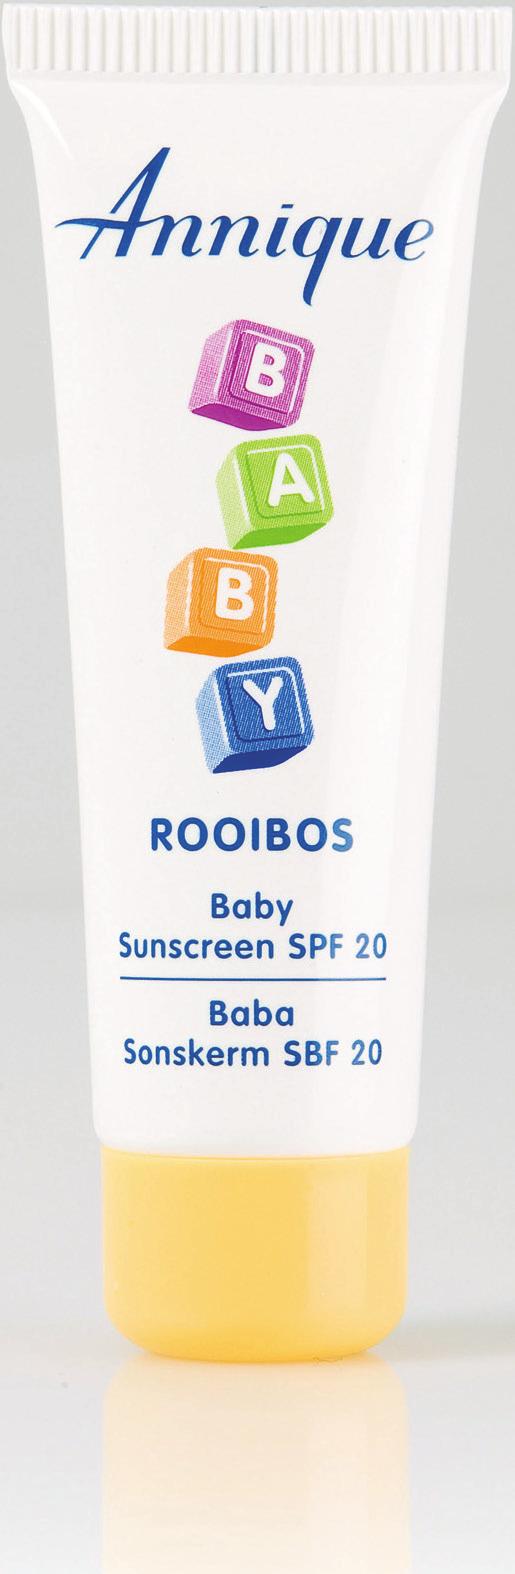 15-20 minutes prior to going outdoors to allow the sunscreen sufficient time to be absorbed.